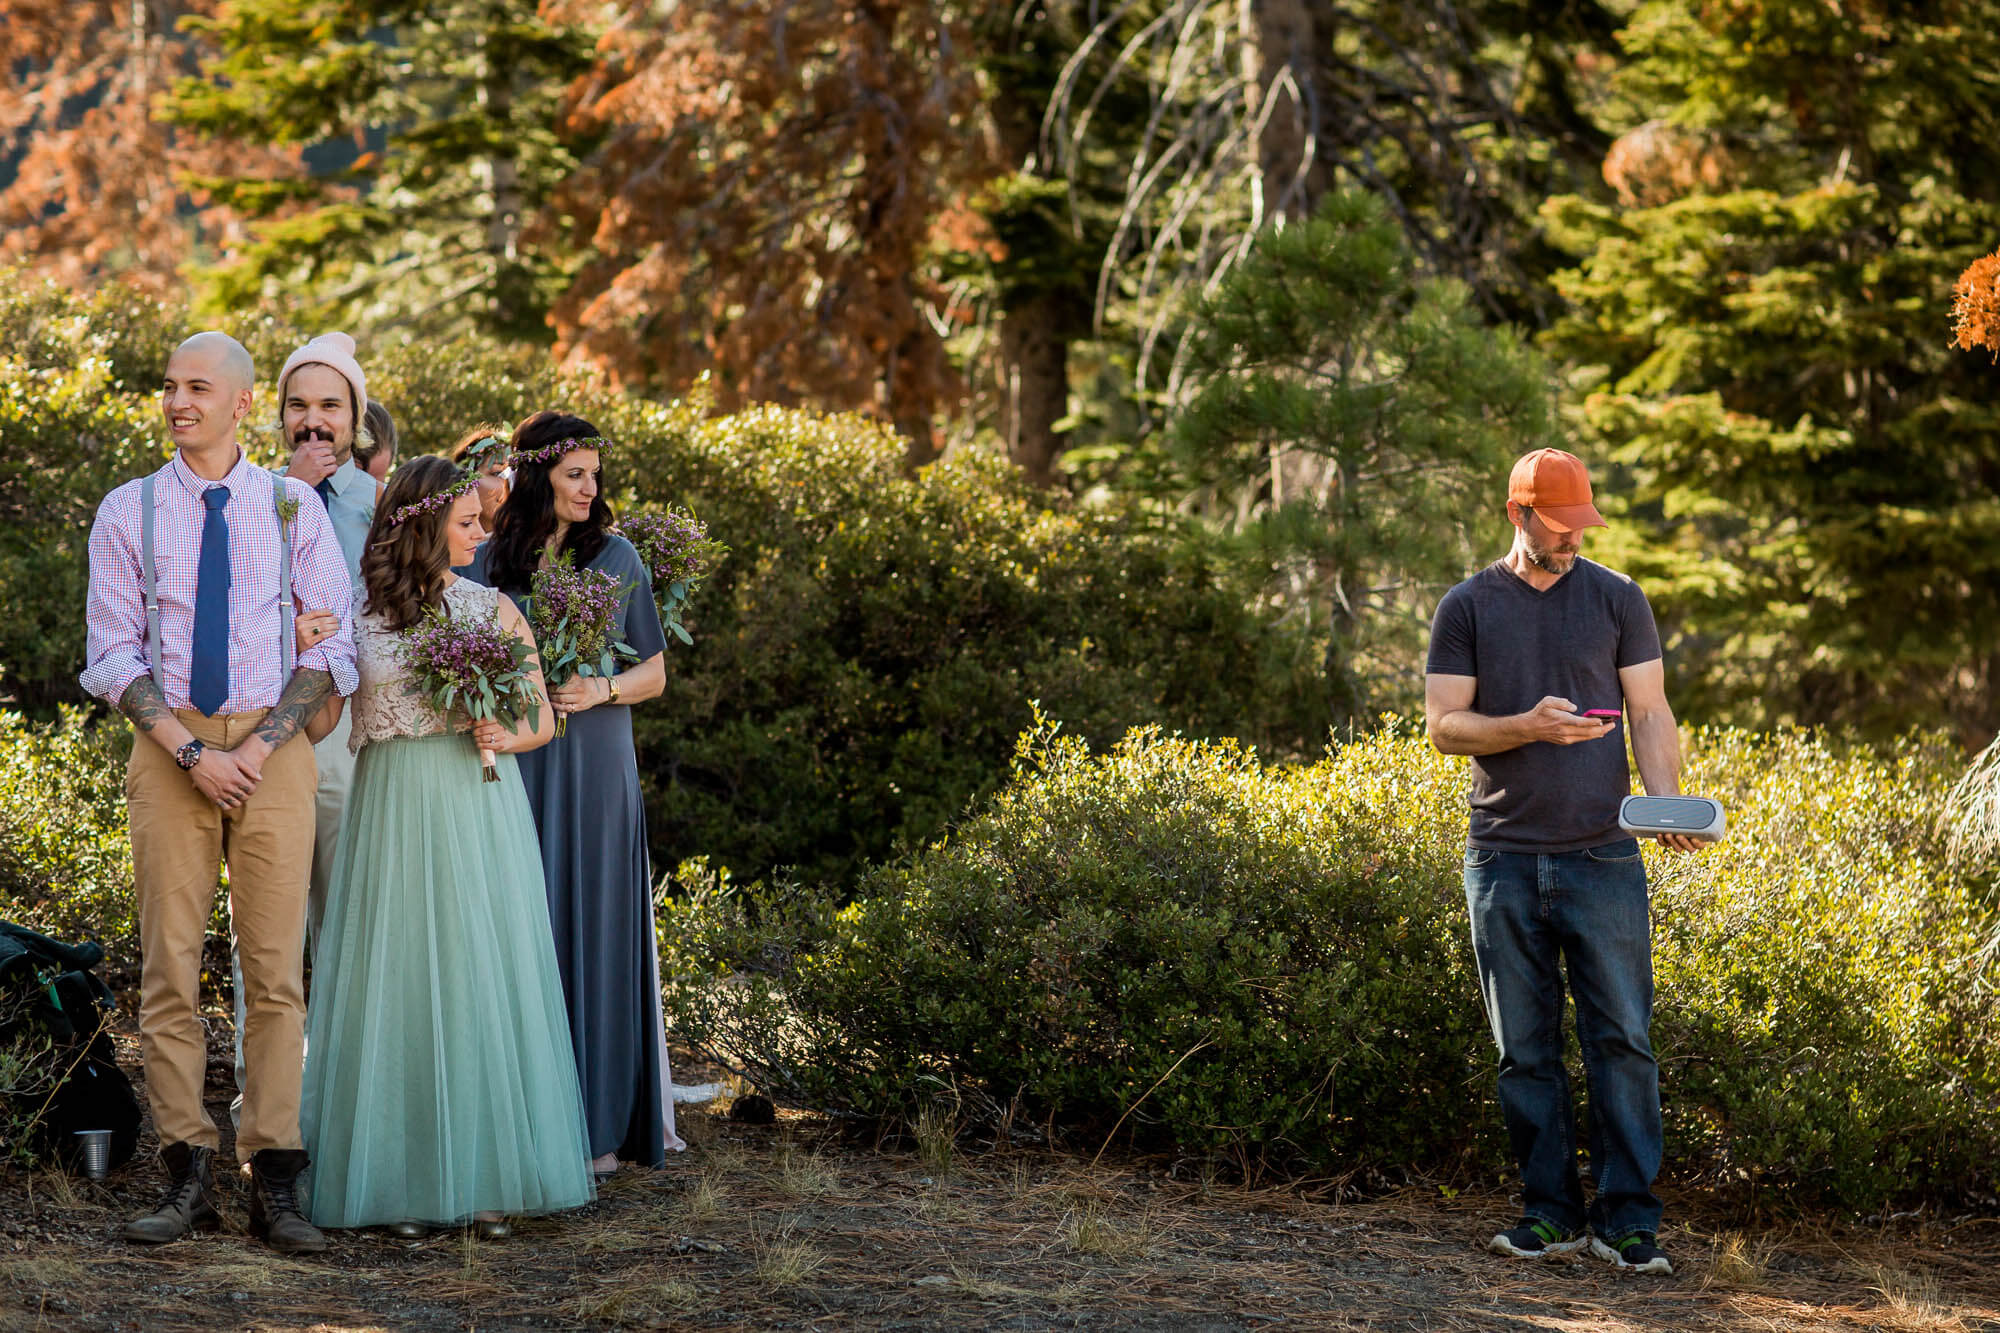 Bridal party waits for the processional while a man in an orange hat tries to start the music